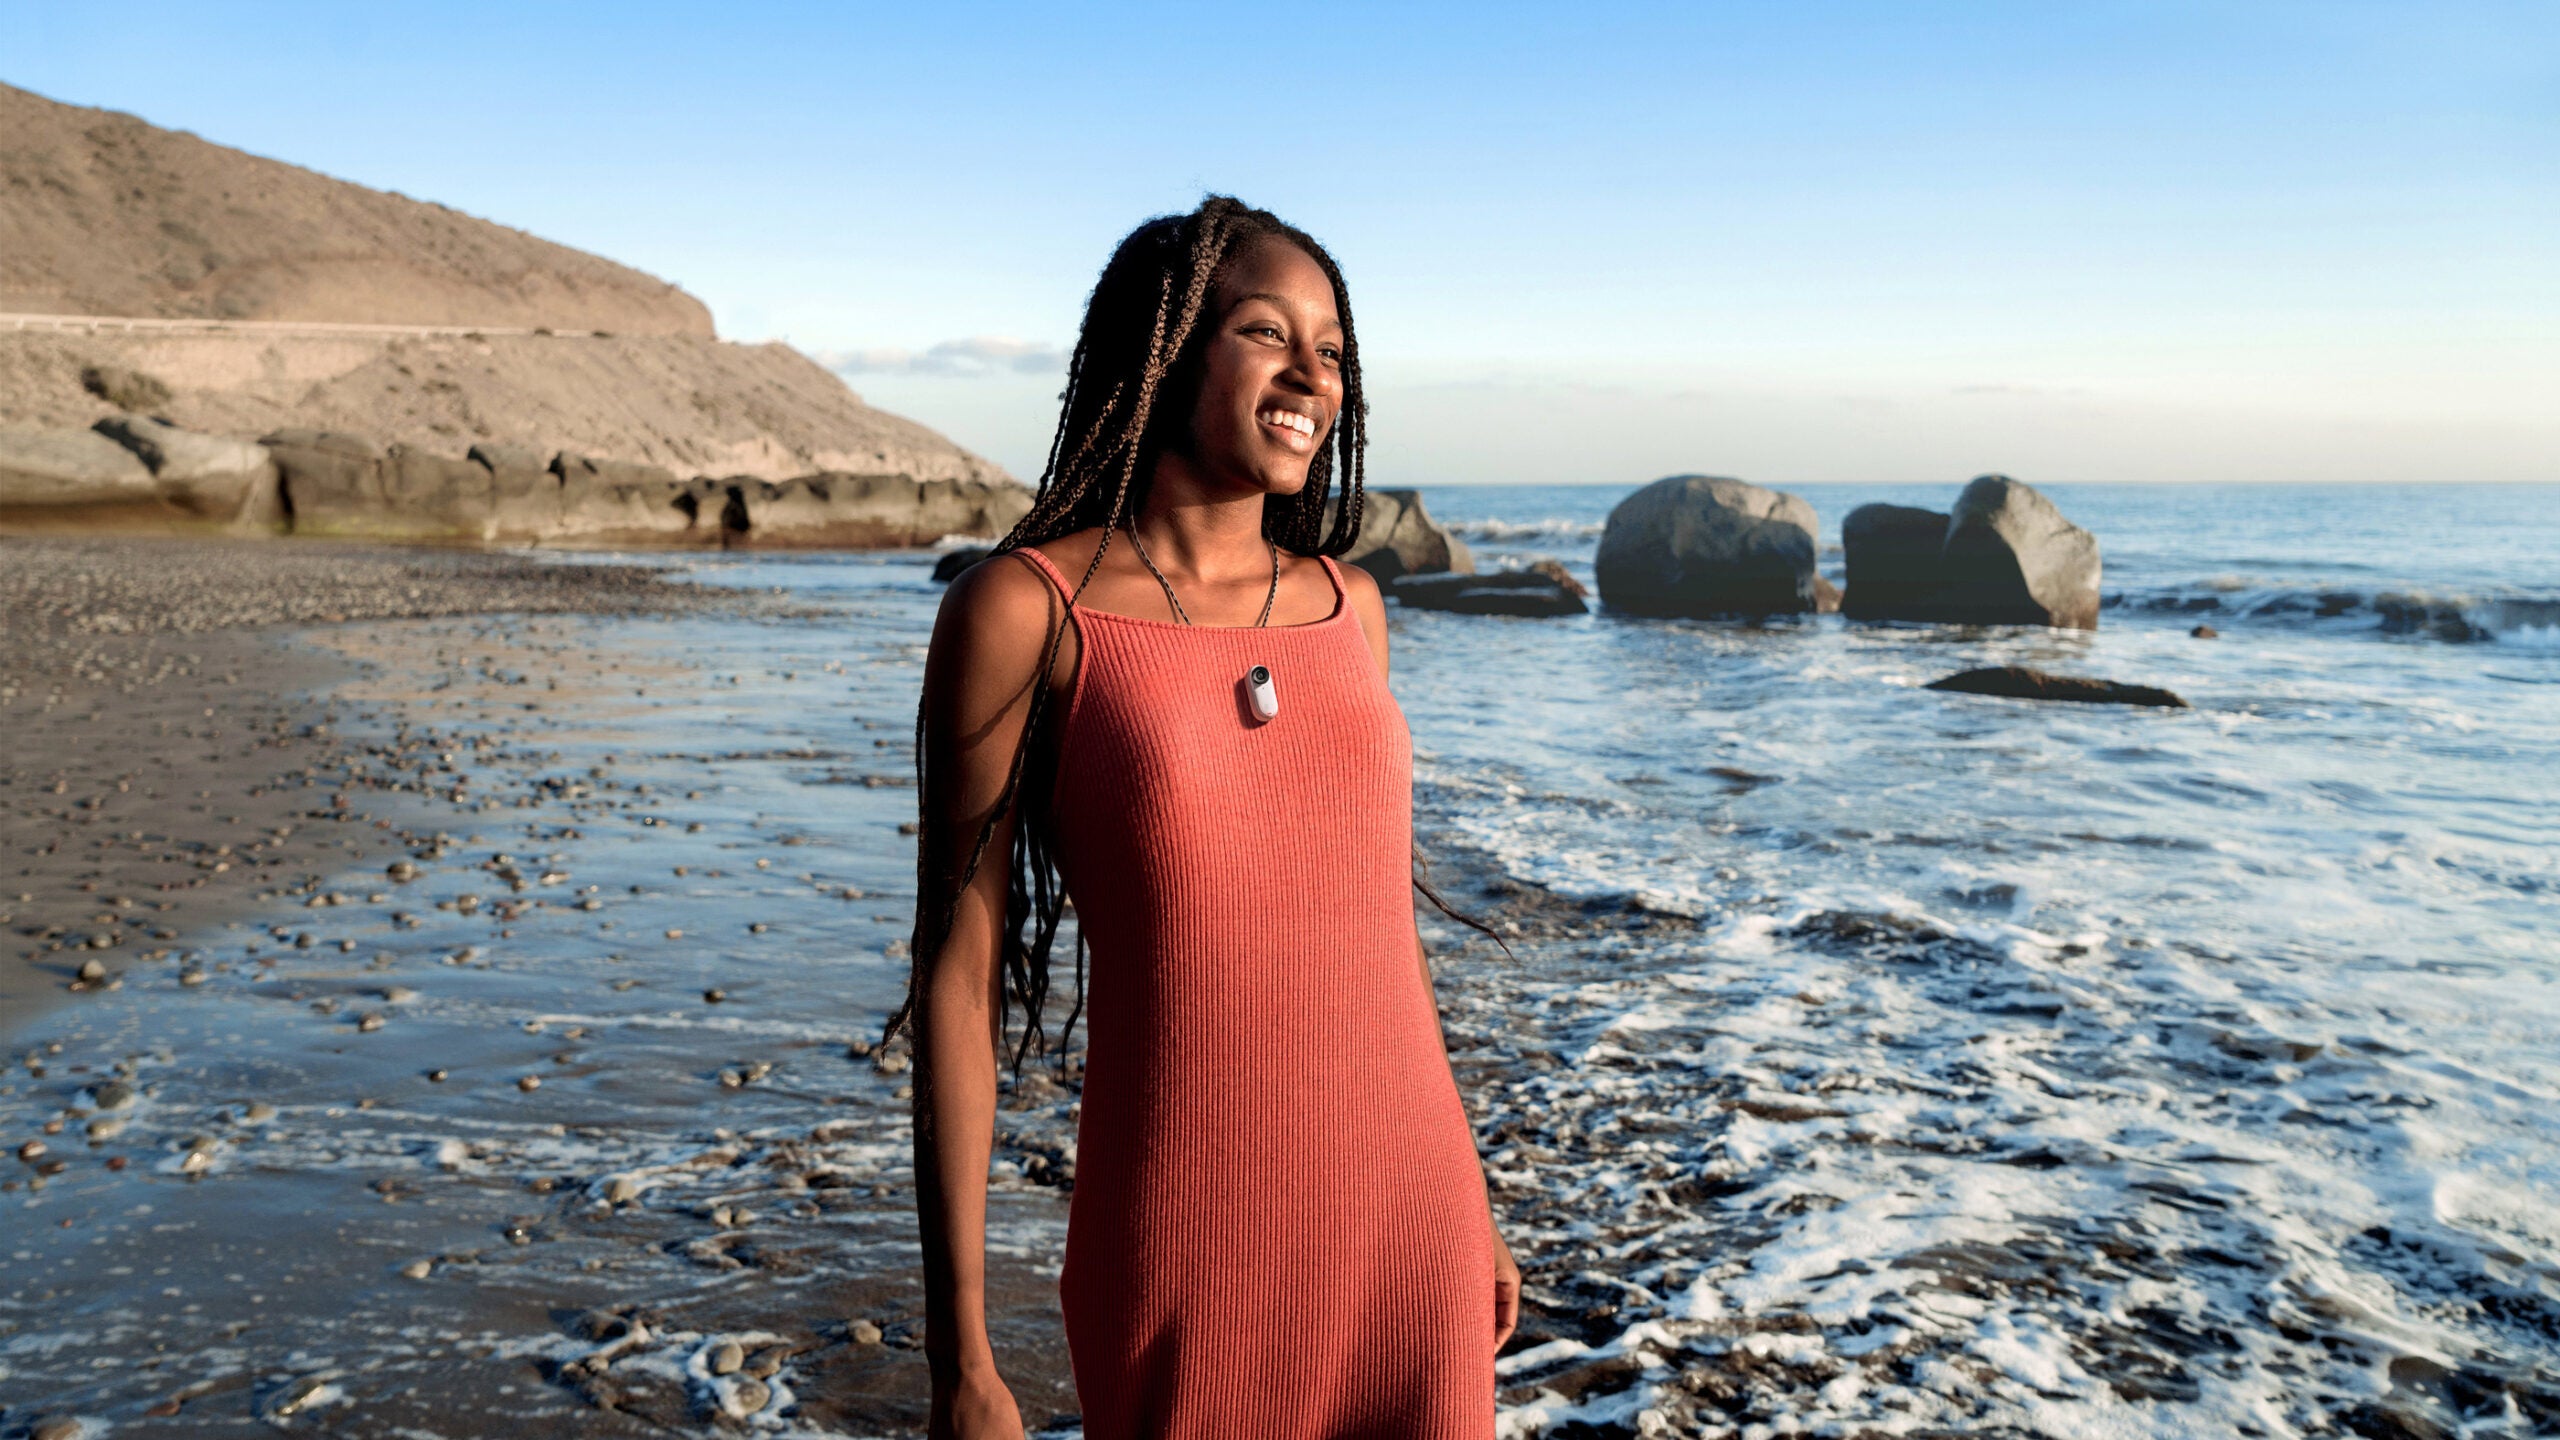 A woman stands in front of the ocean wearing the Insta360 GO 3 magnet pendant.